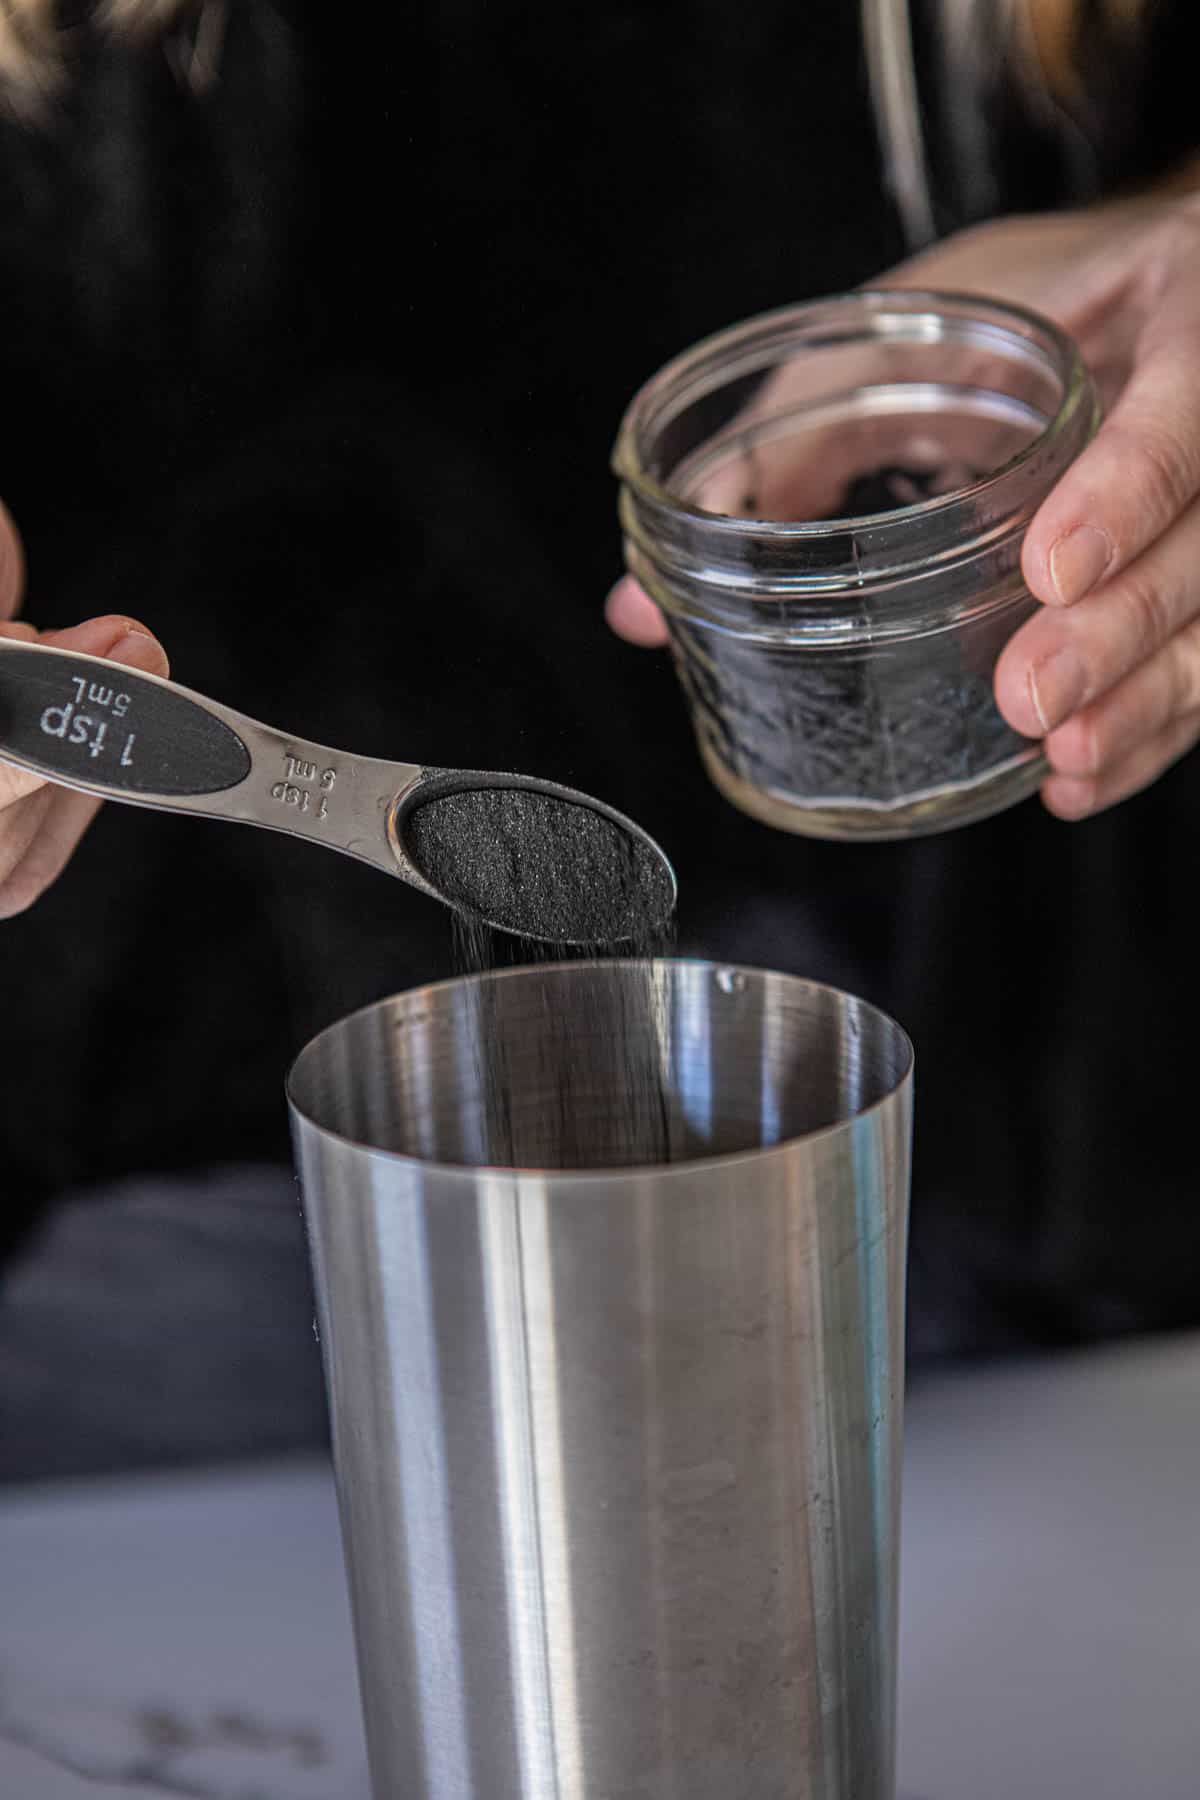 Woman adding activated charcoal to a cocktail shaker.